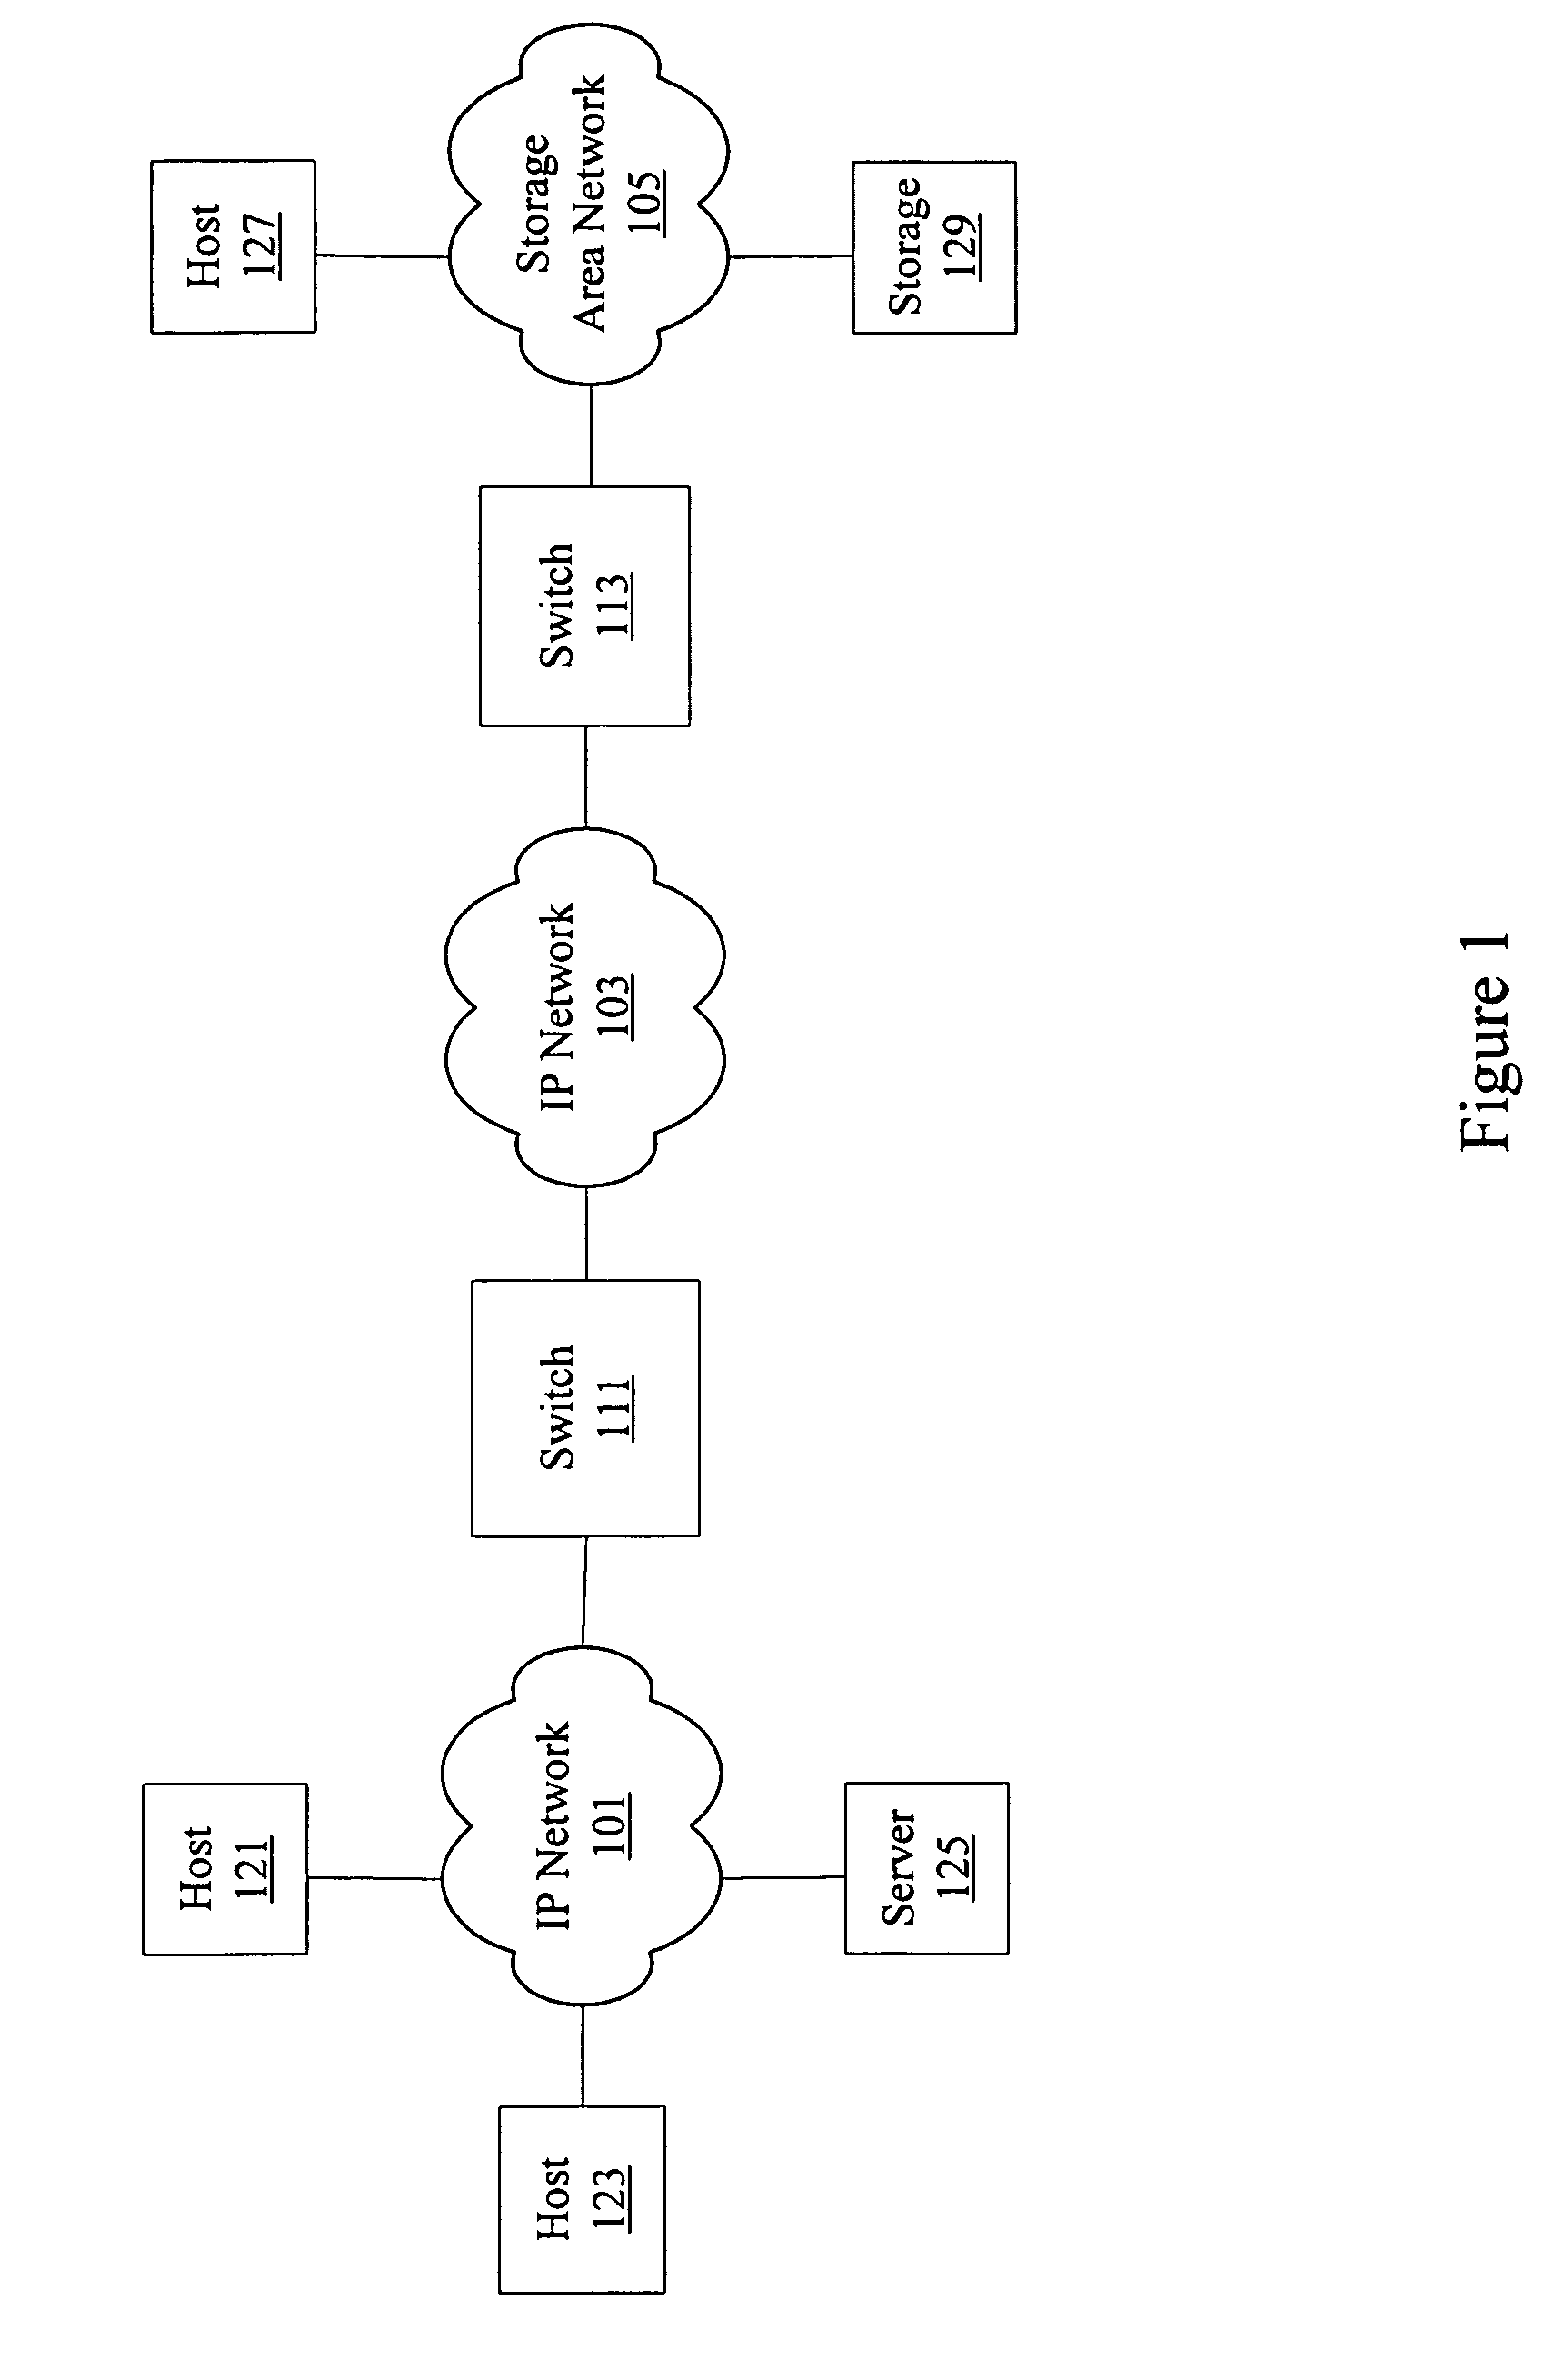 Methods and apparatus for improved determination of network metrics